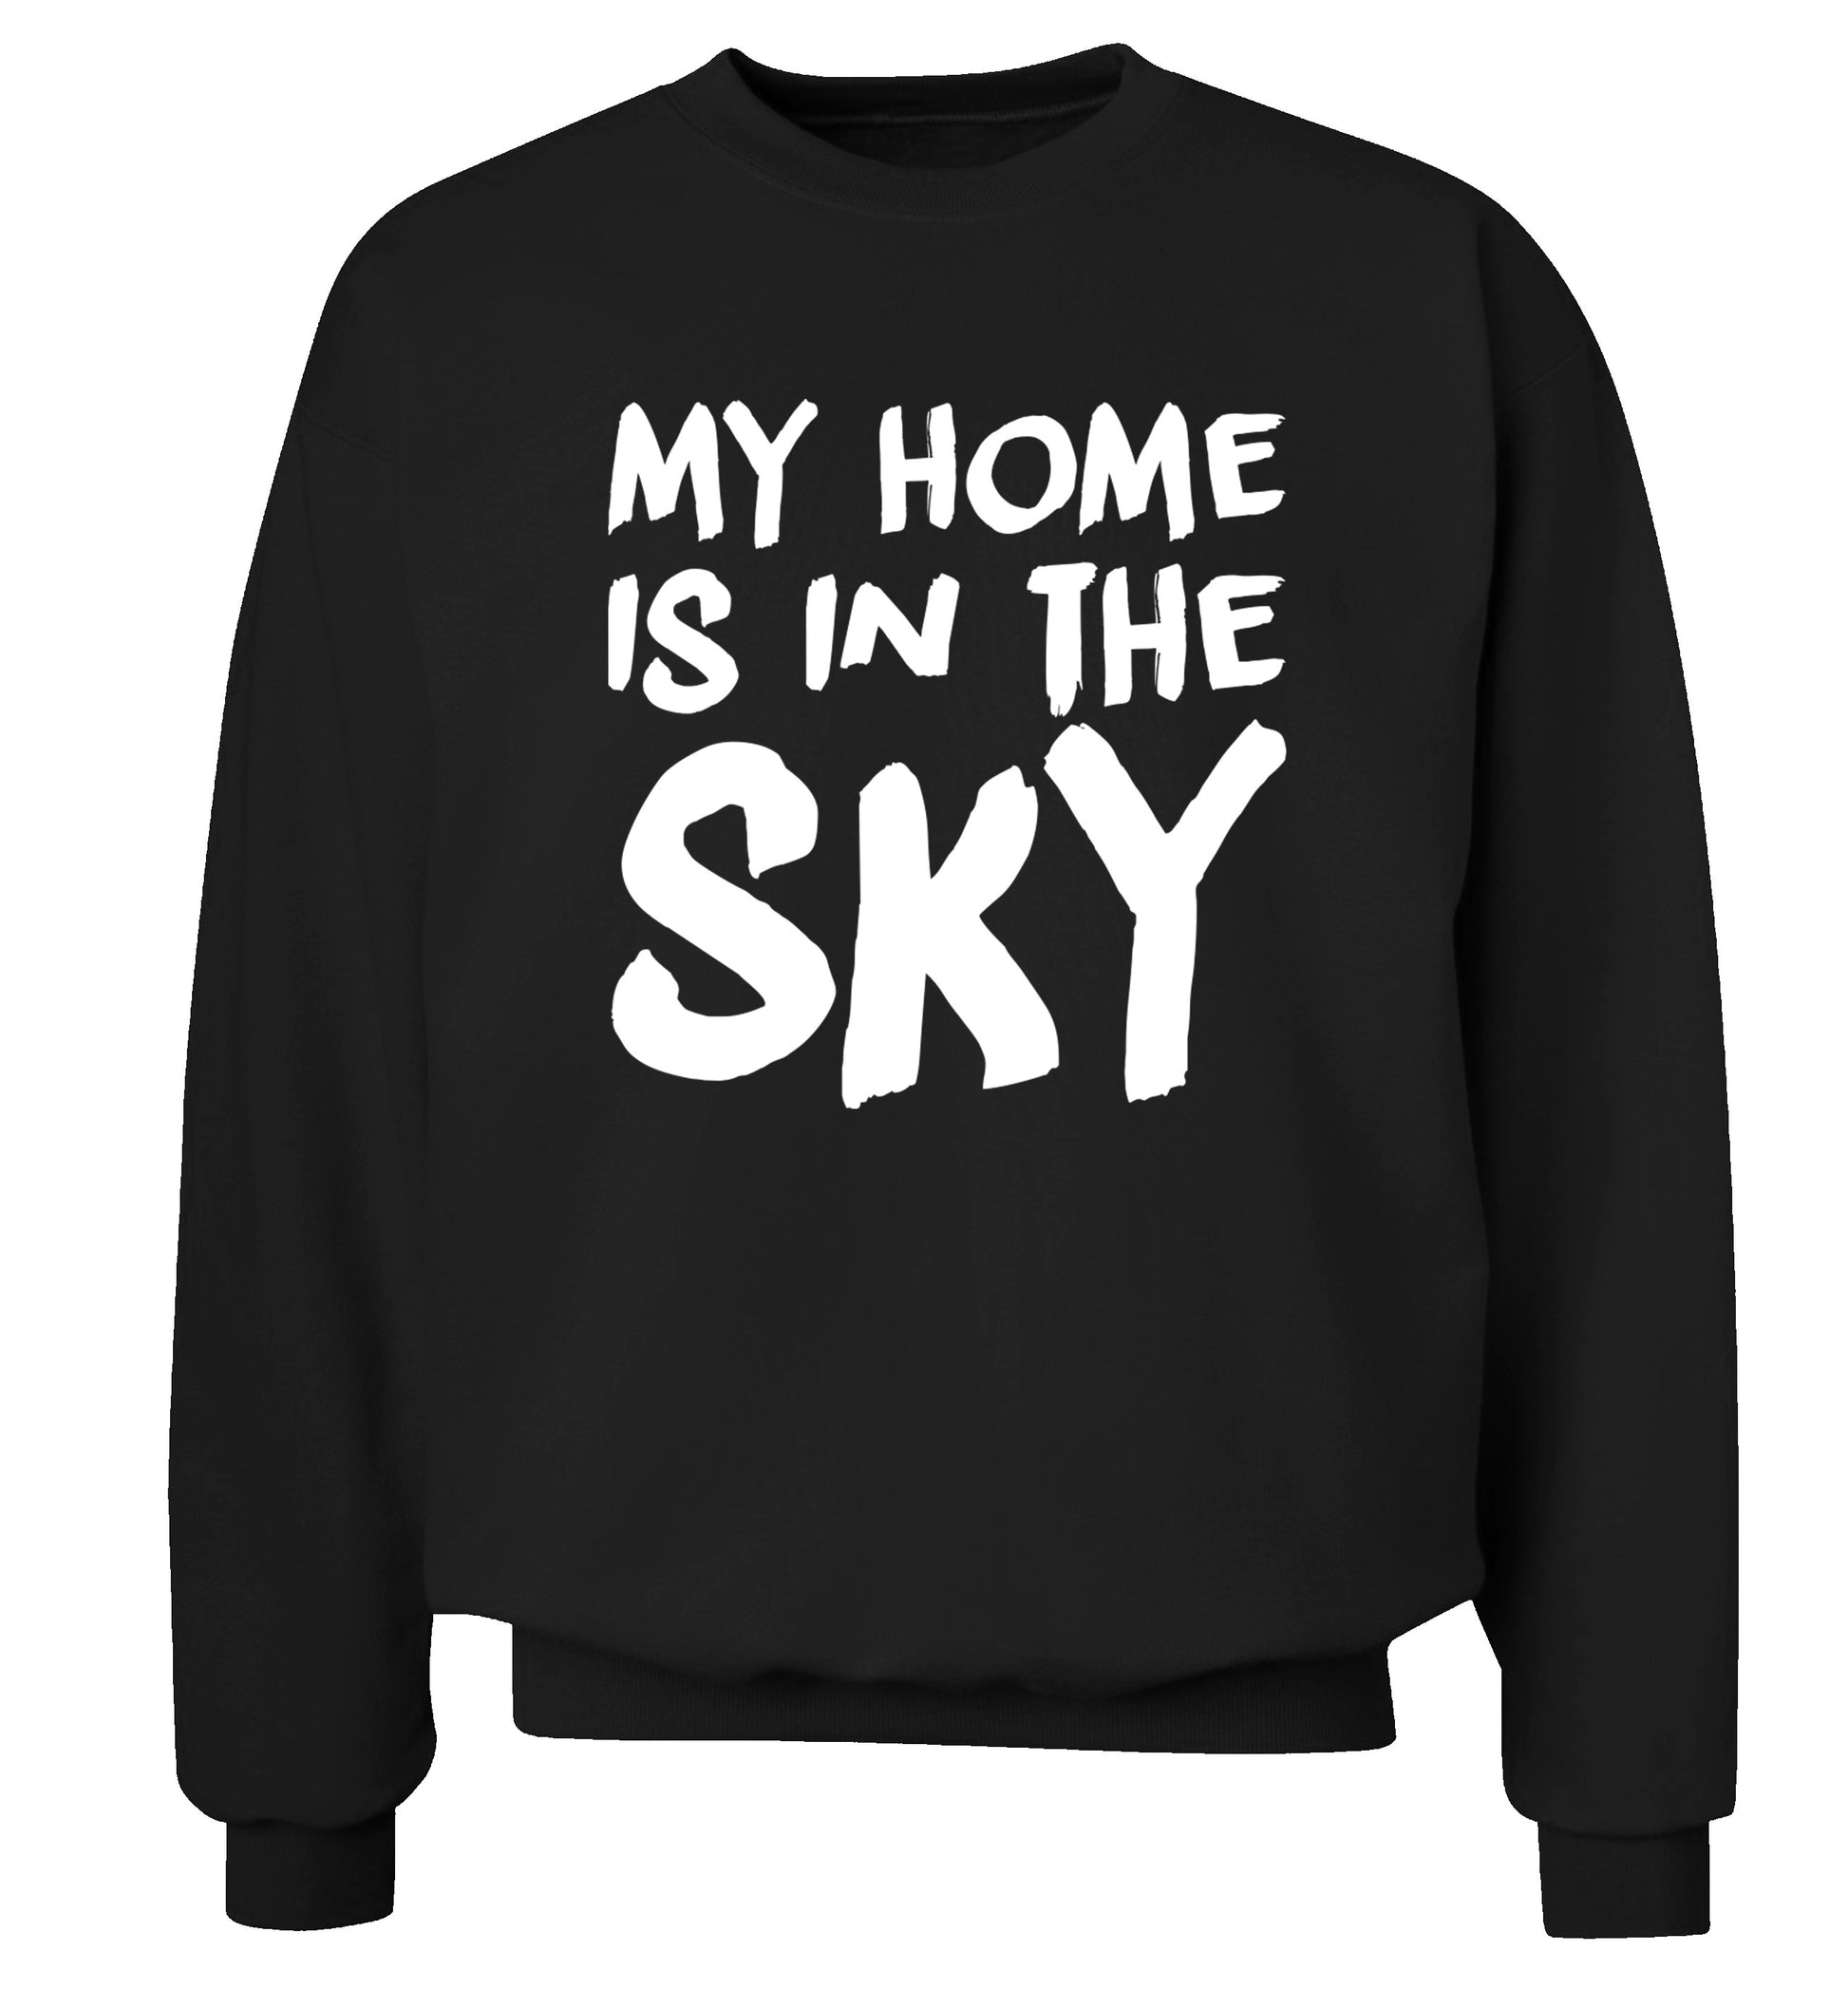 My home is in the sky Adult's unisex black Sweater 2XL